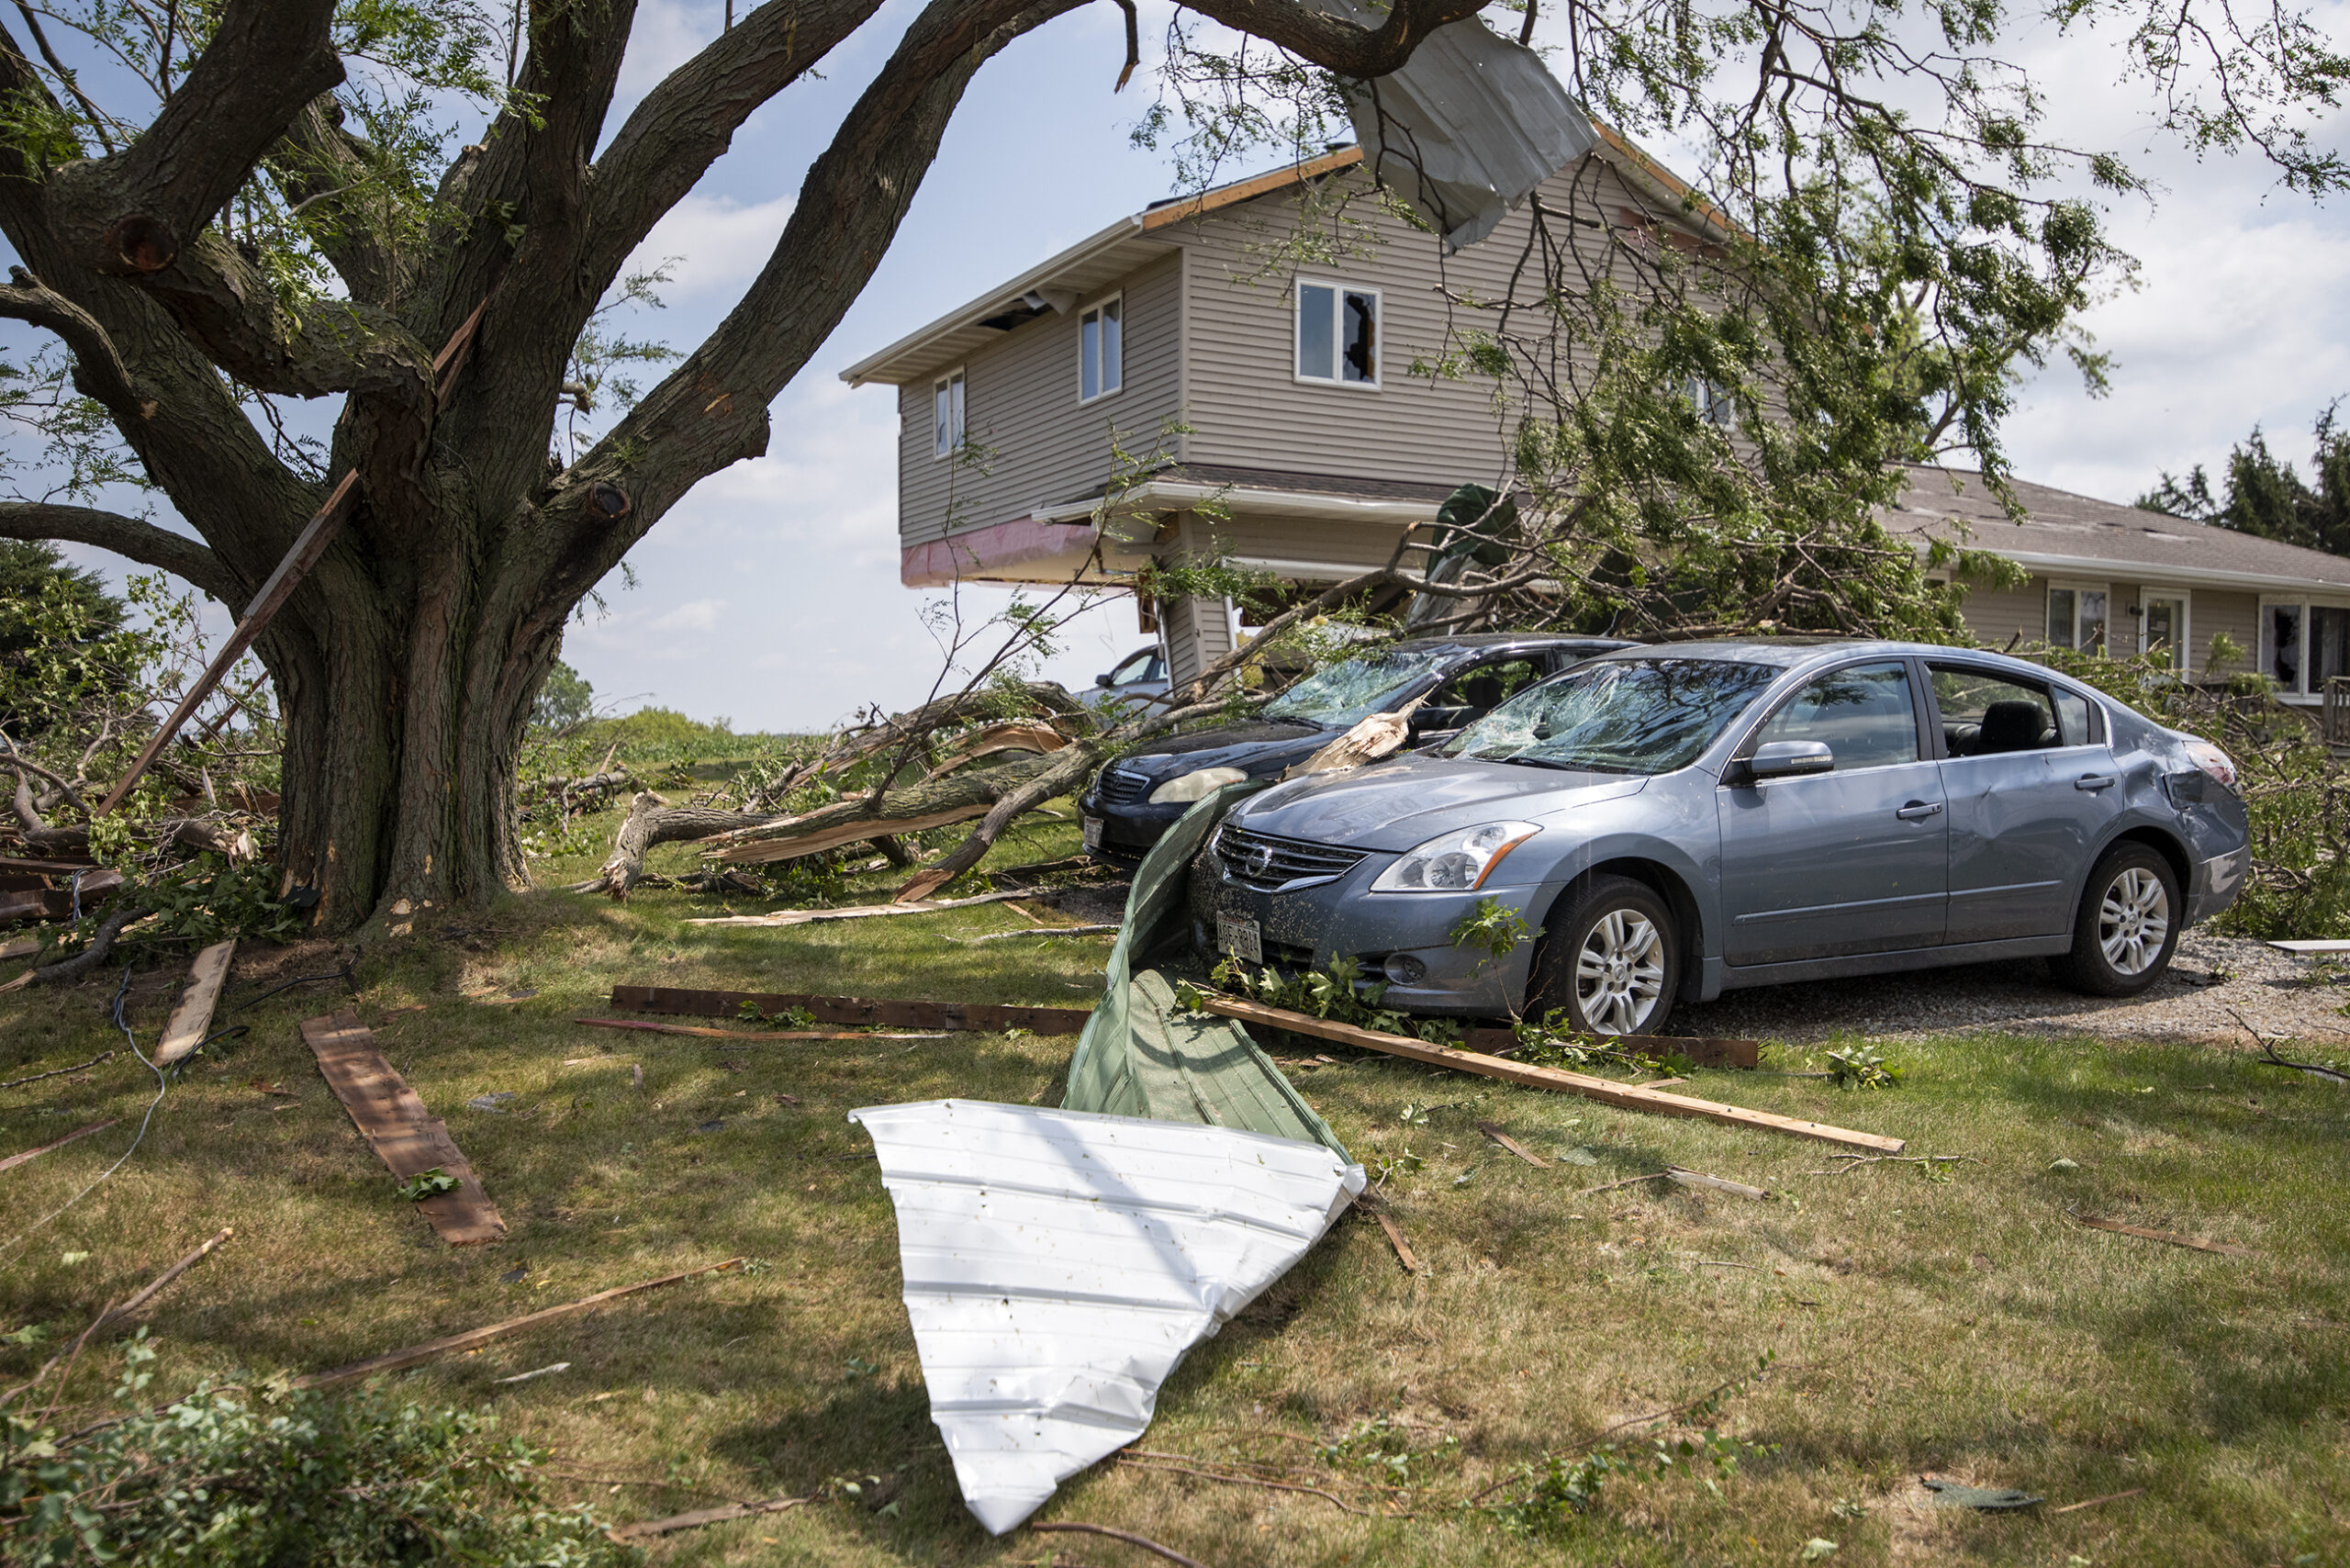 Two damaged vehicles sit next to a home with severe storm damage.